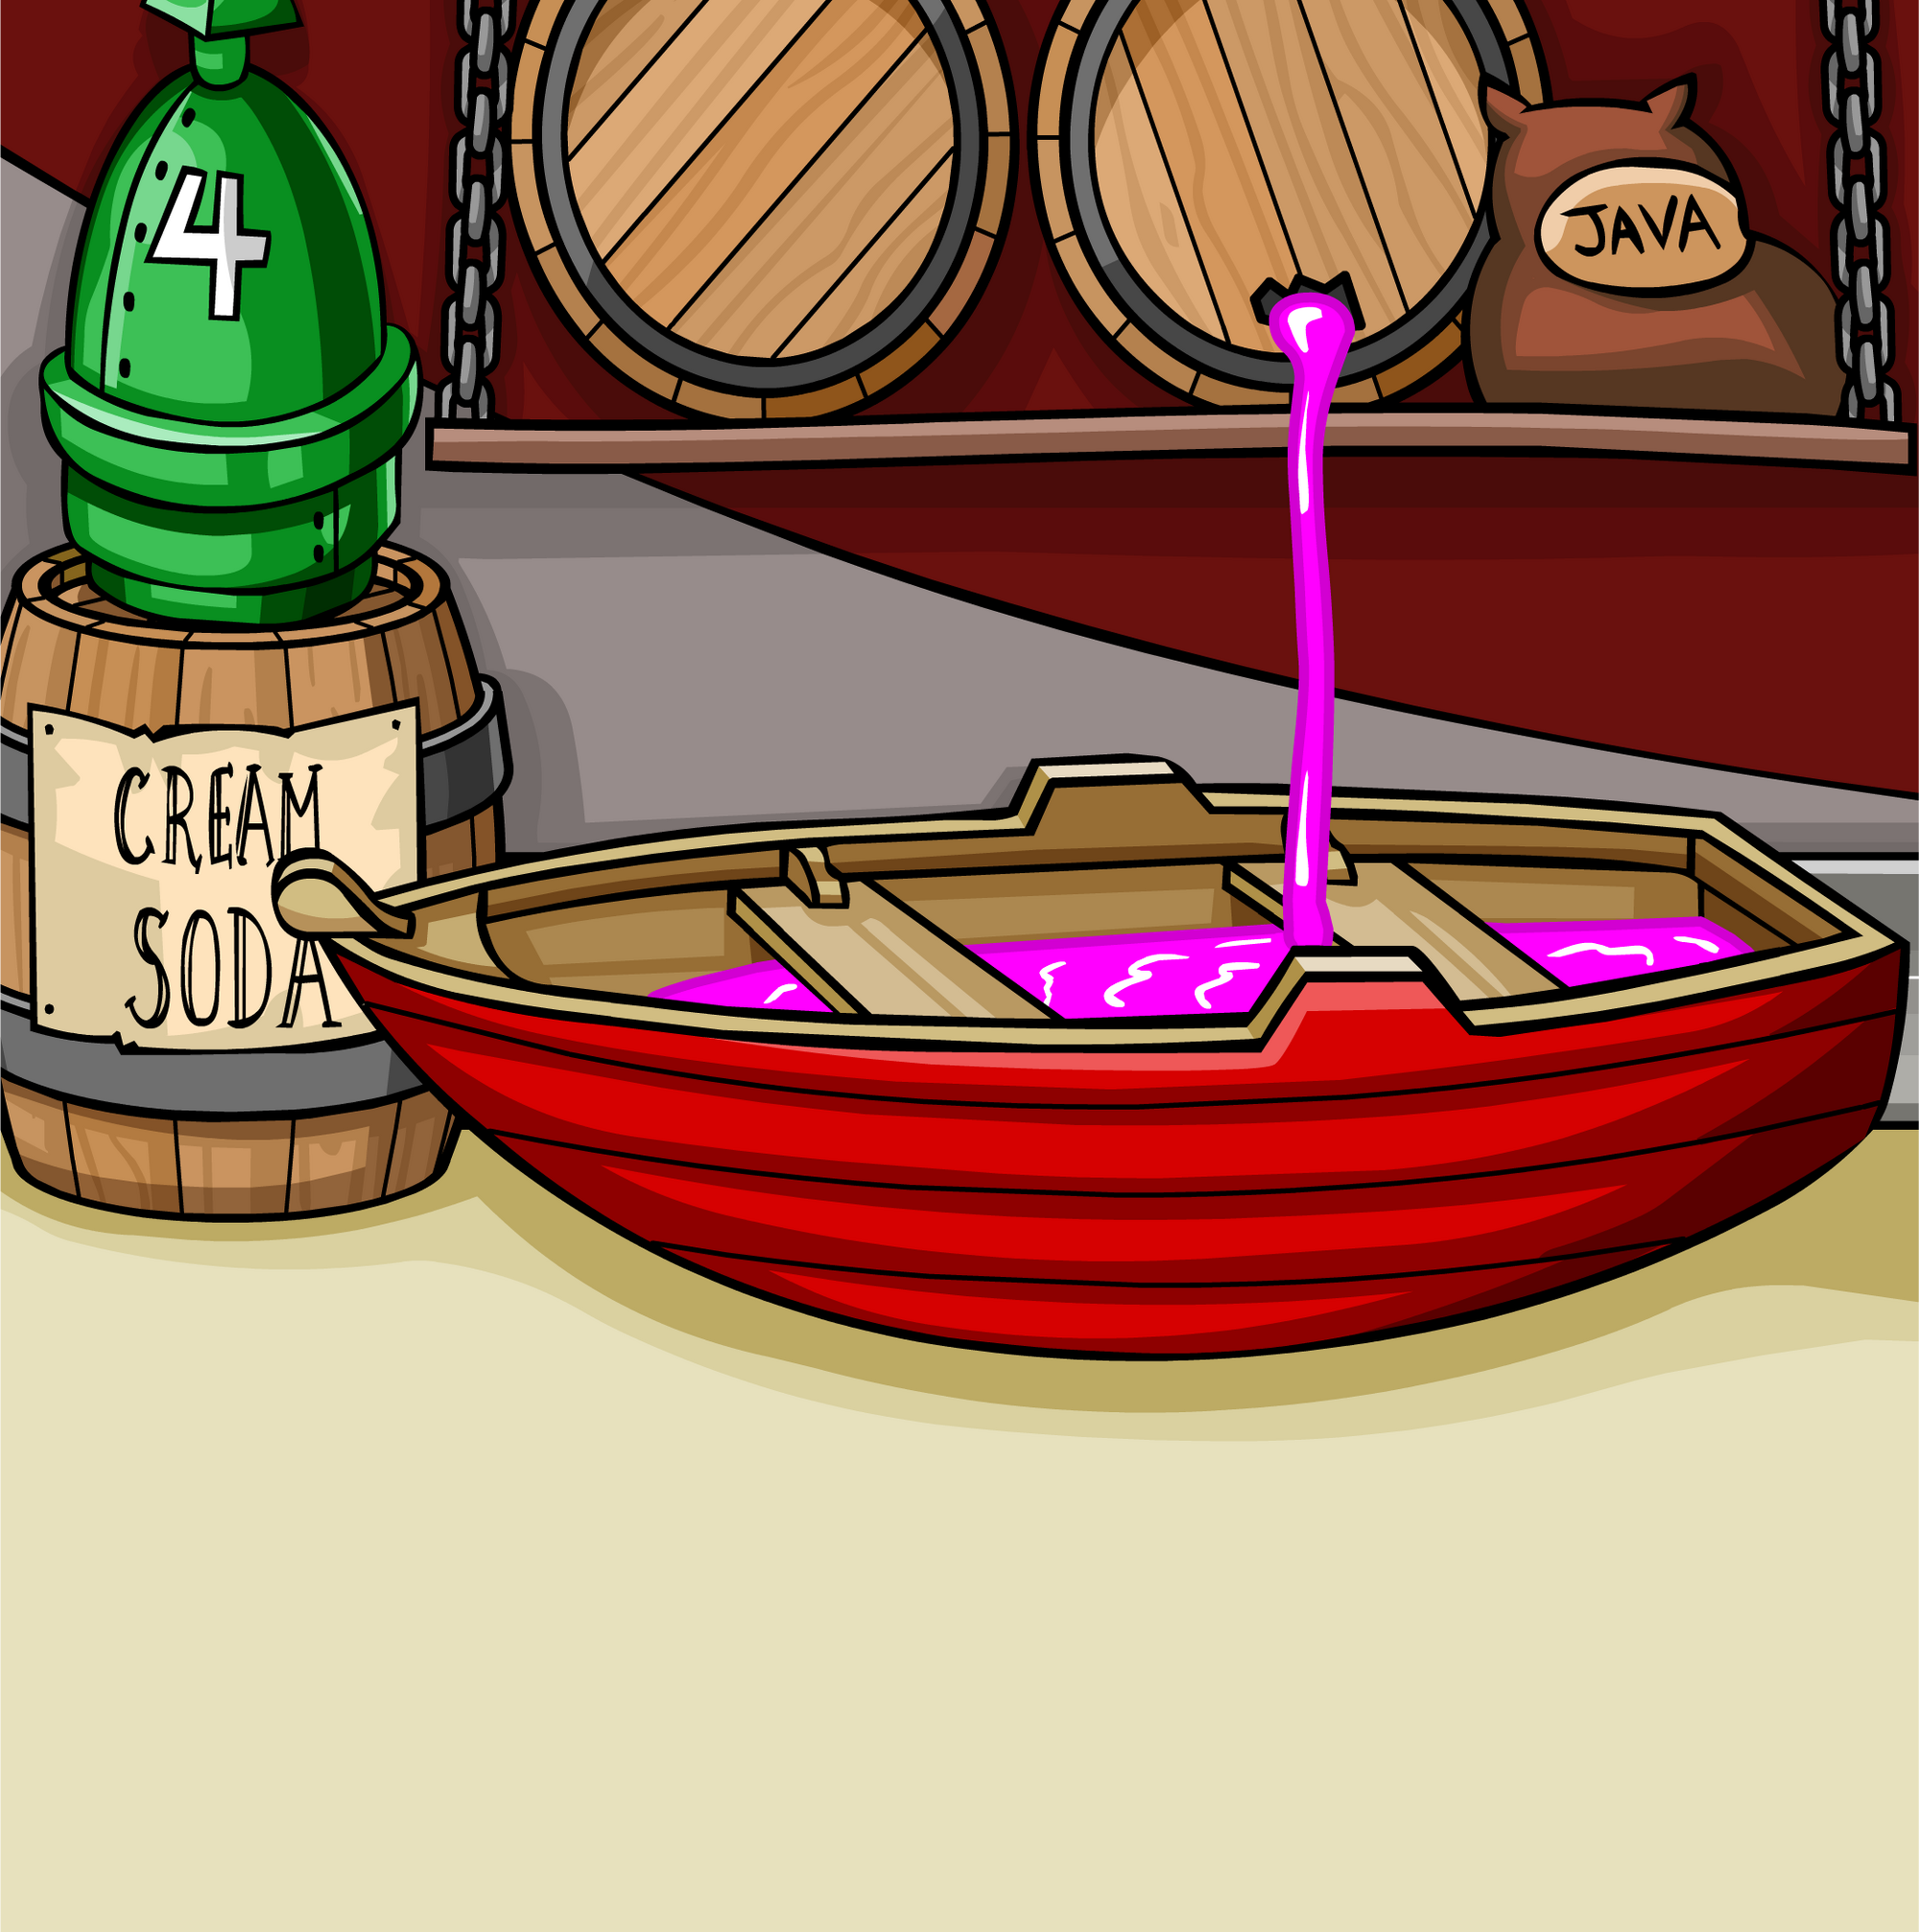 Image result for cream soda background cpr